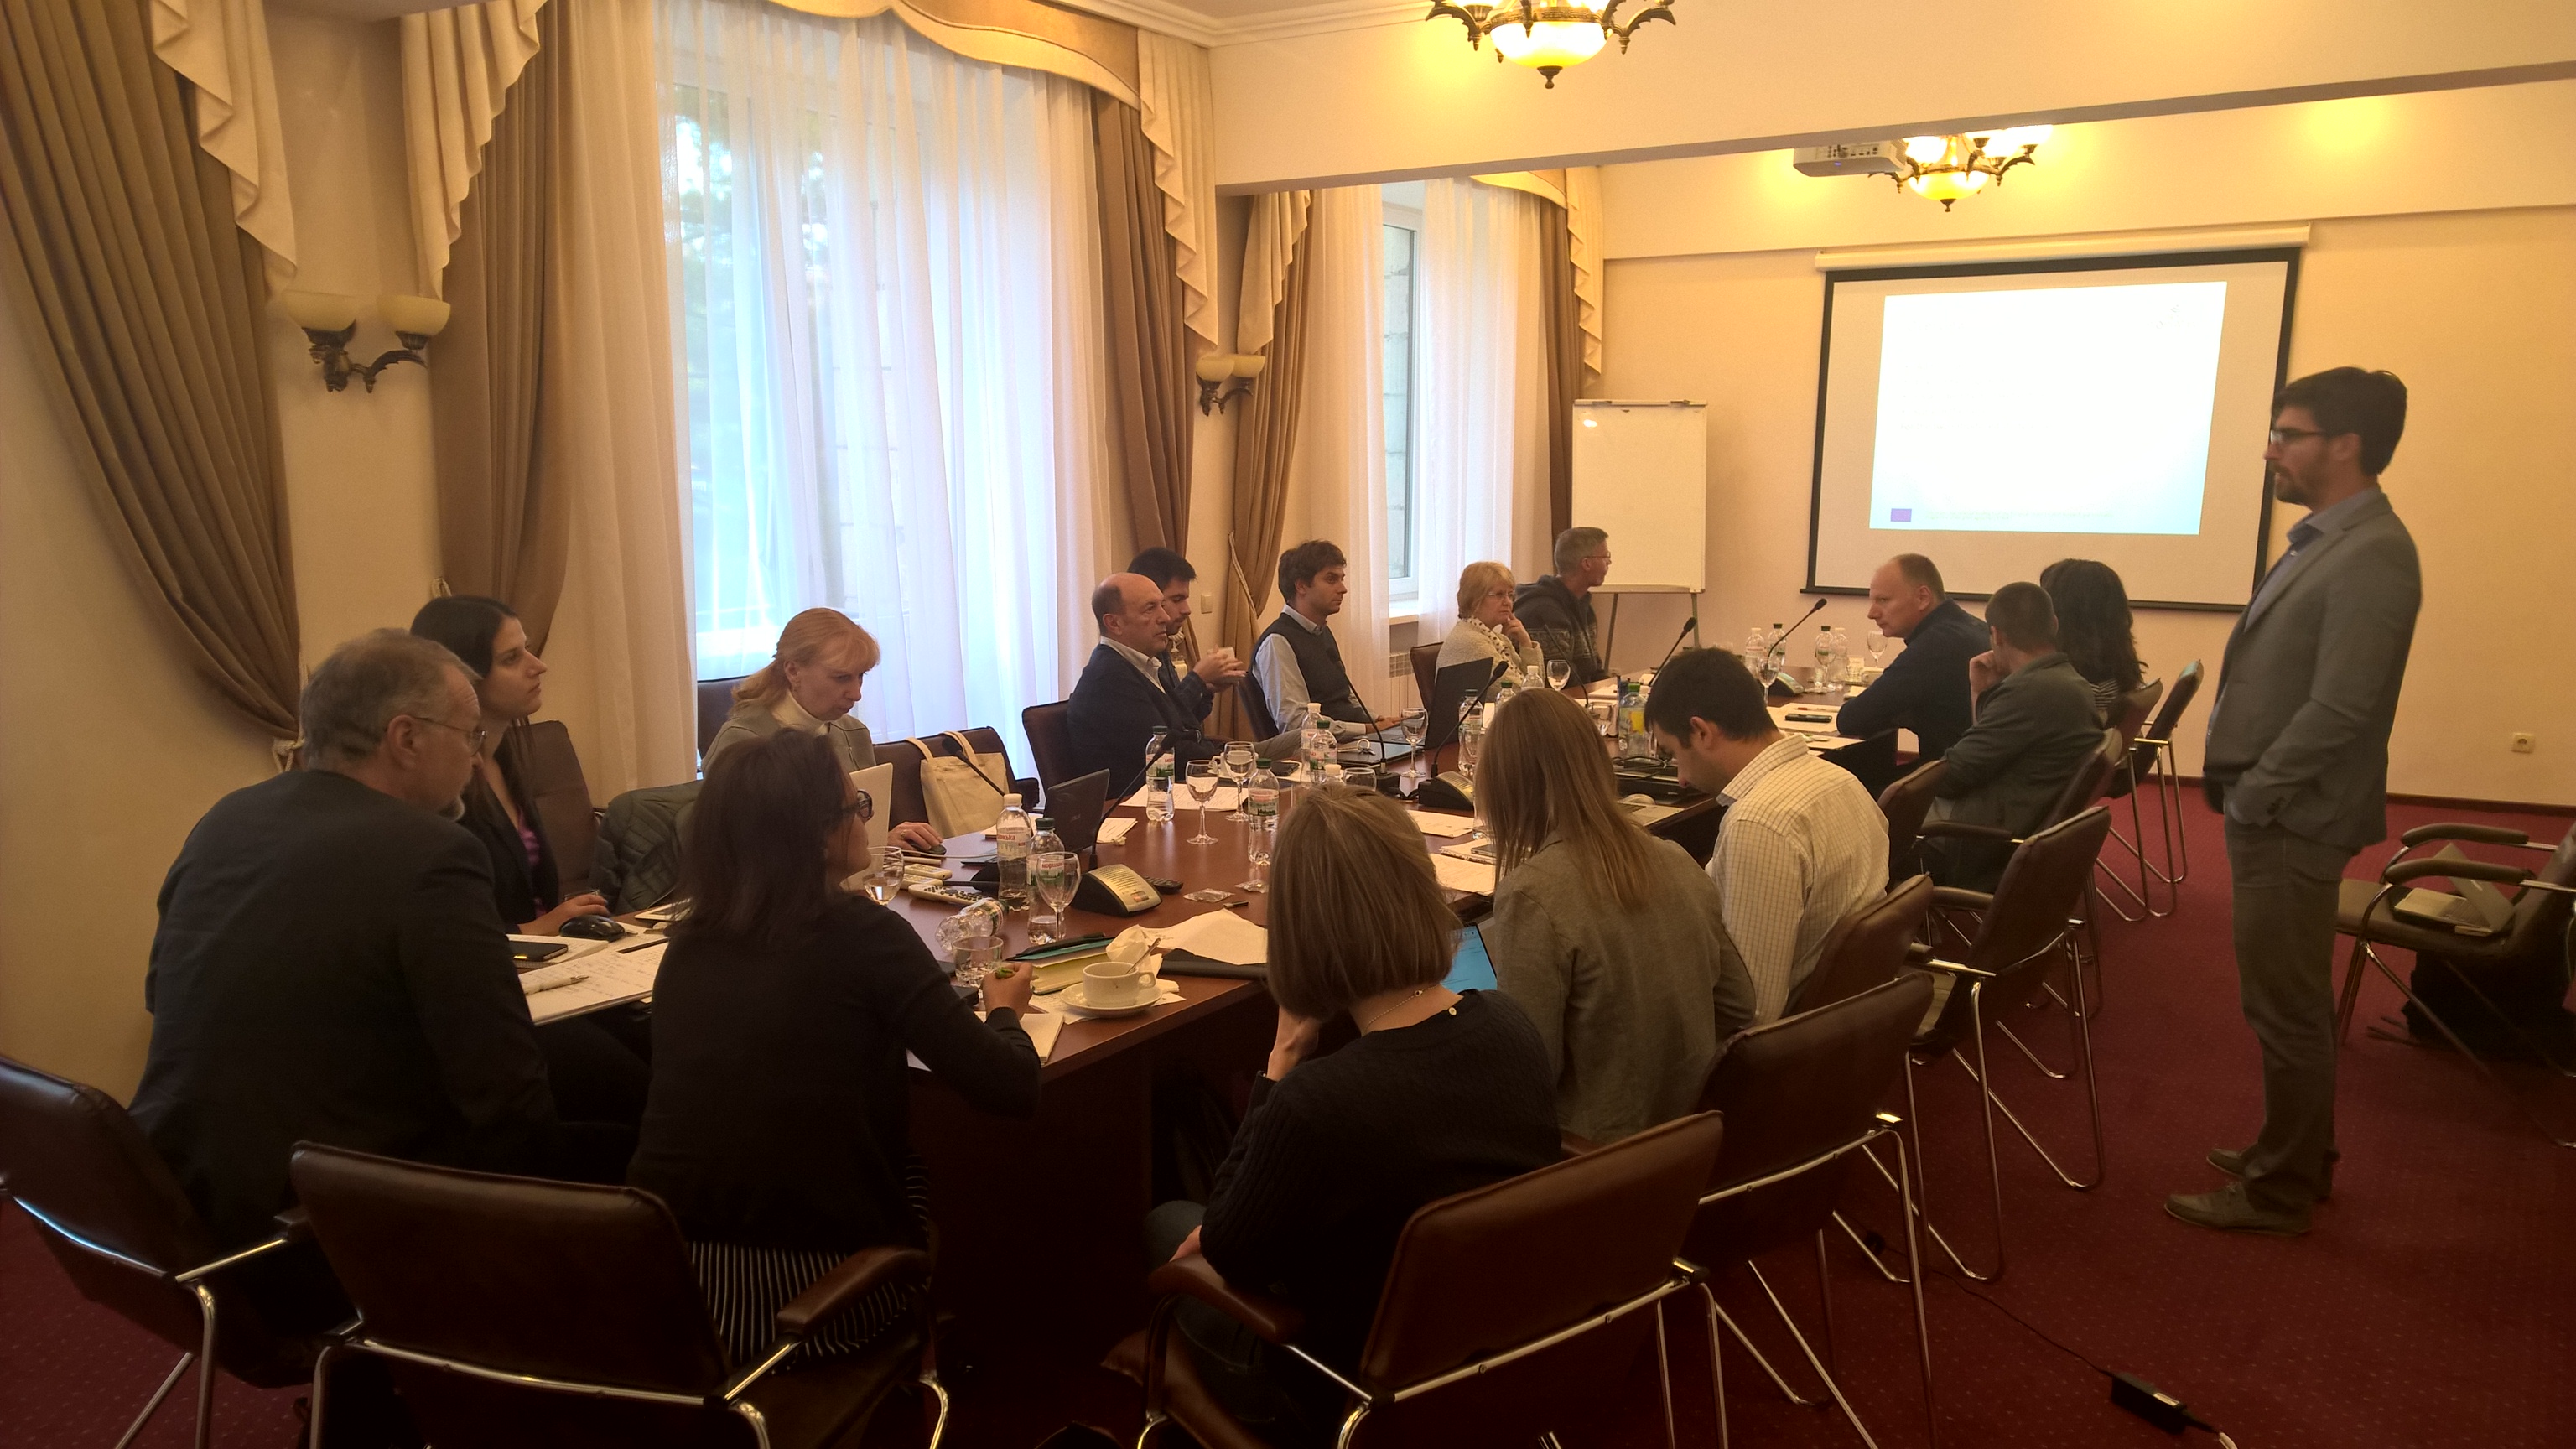 Second BIOPLAT-EU project meeting concluded in Kyiv on 26 September 2019